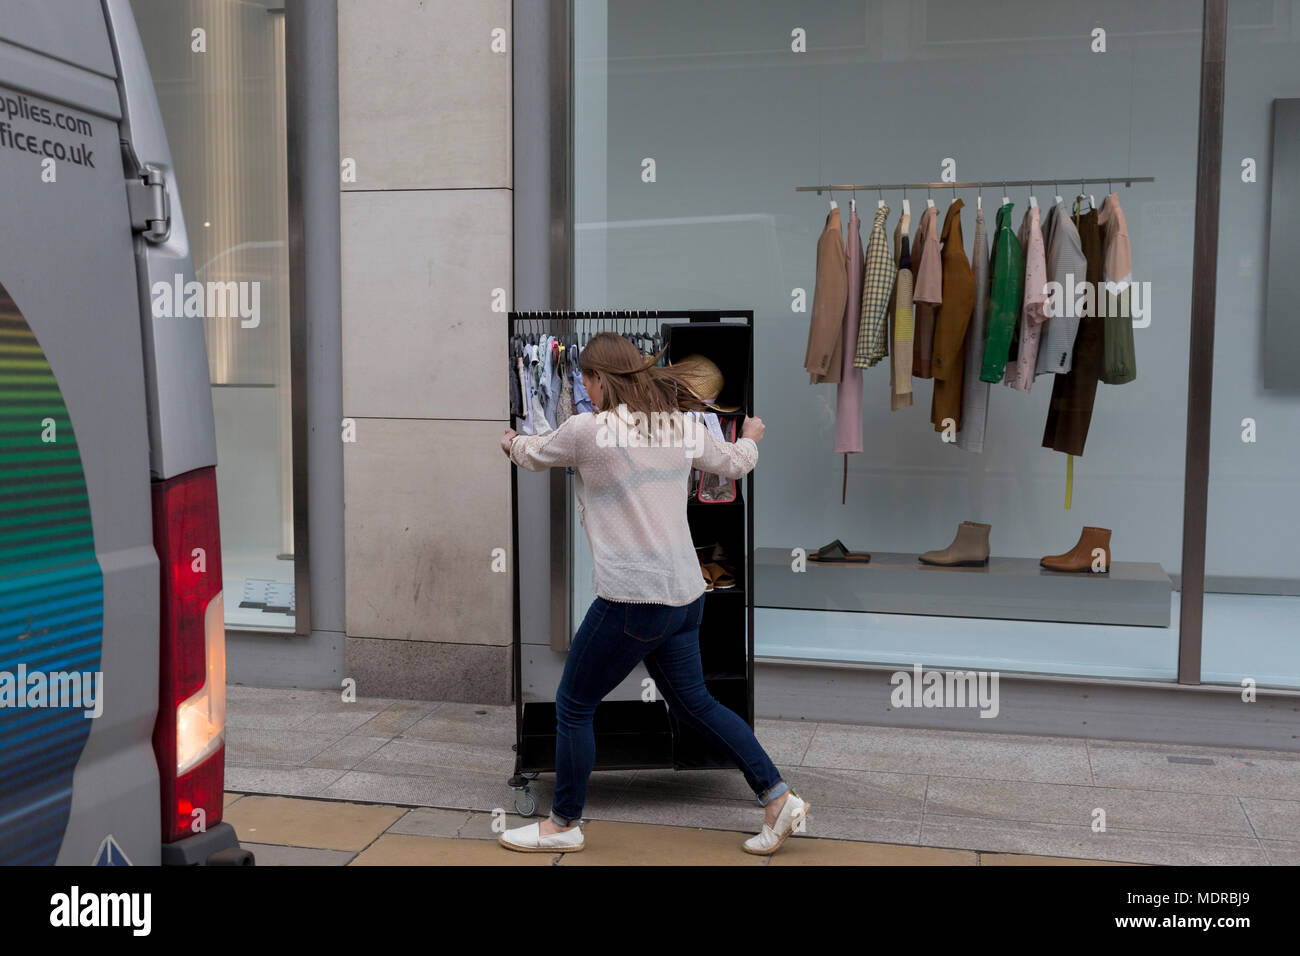 A member of staff from the retailer Zara, pushes a rack of childrens'  clothes on New Bond Street, on 16th April 2018, in London, England Stock  Photo - Alamy